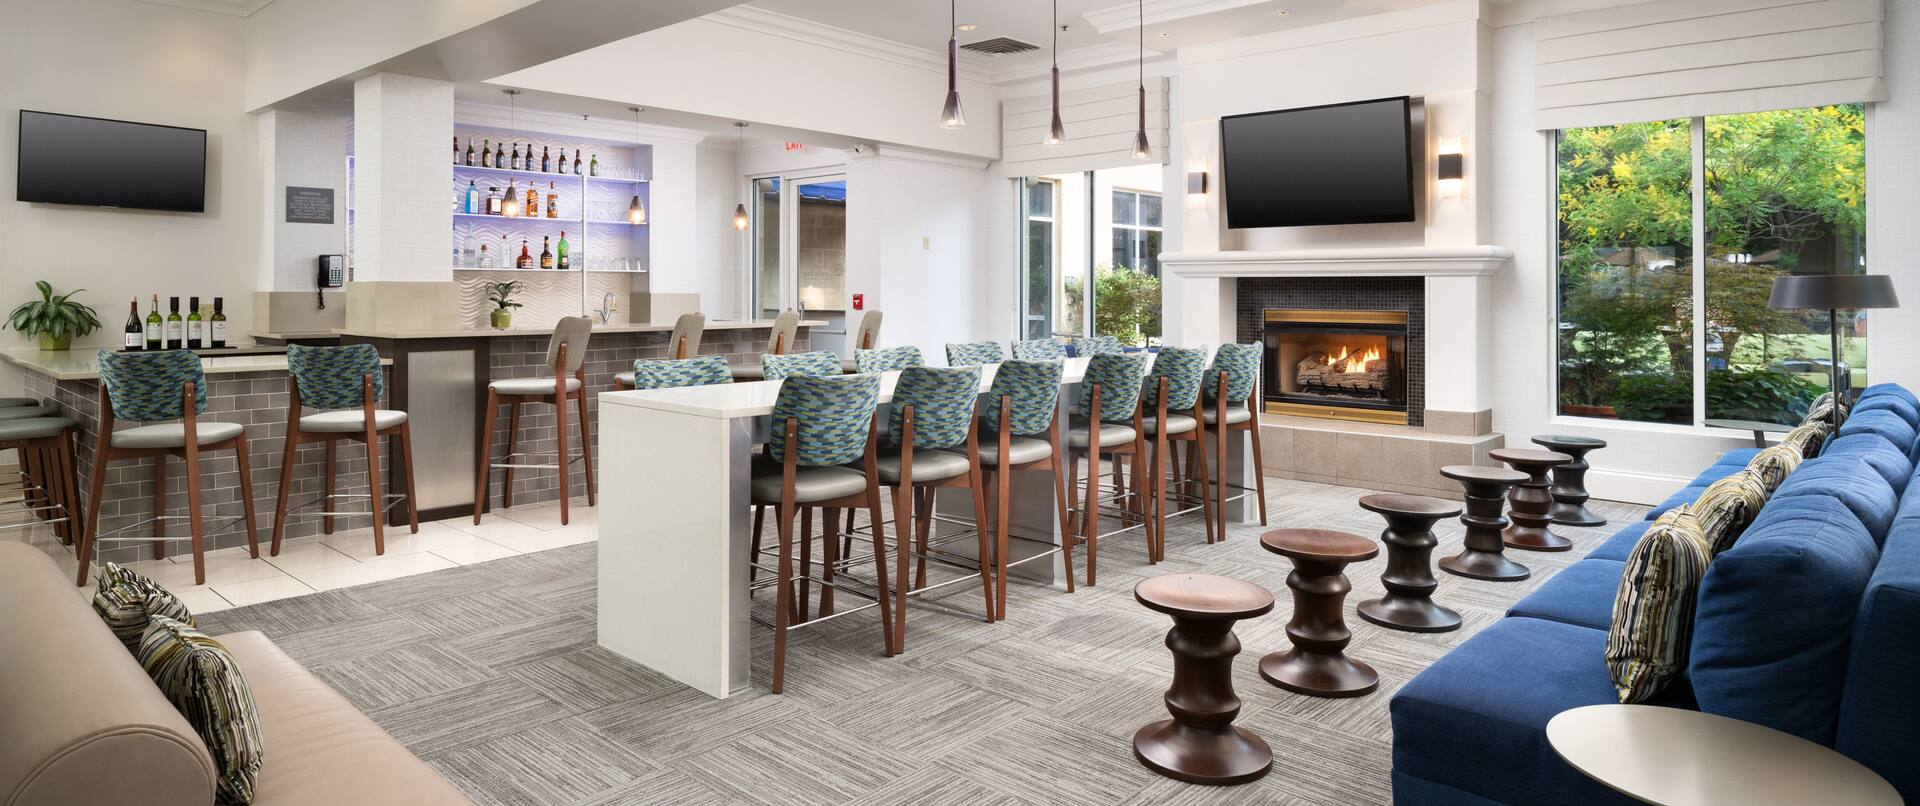 Lobby Area with Large Sofa Table and Chairs TVs and Fireplace